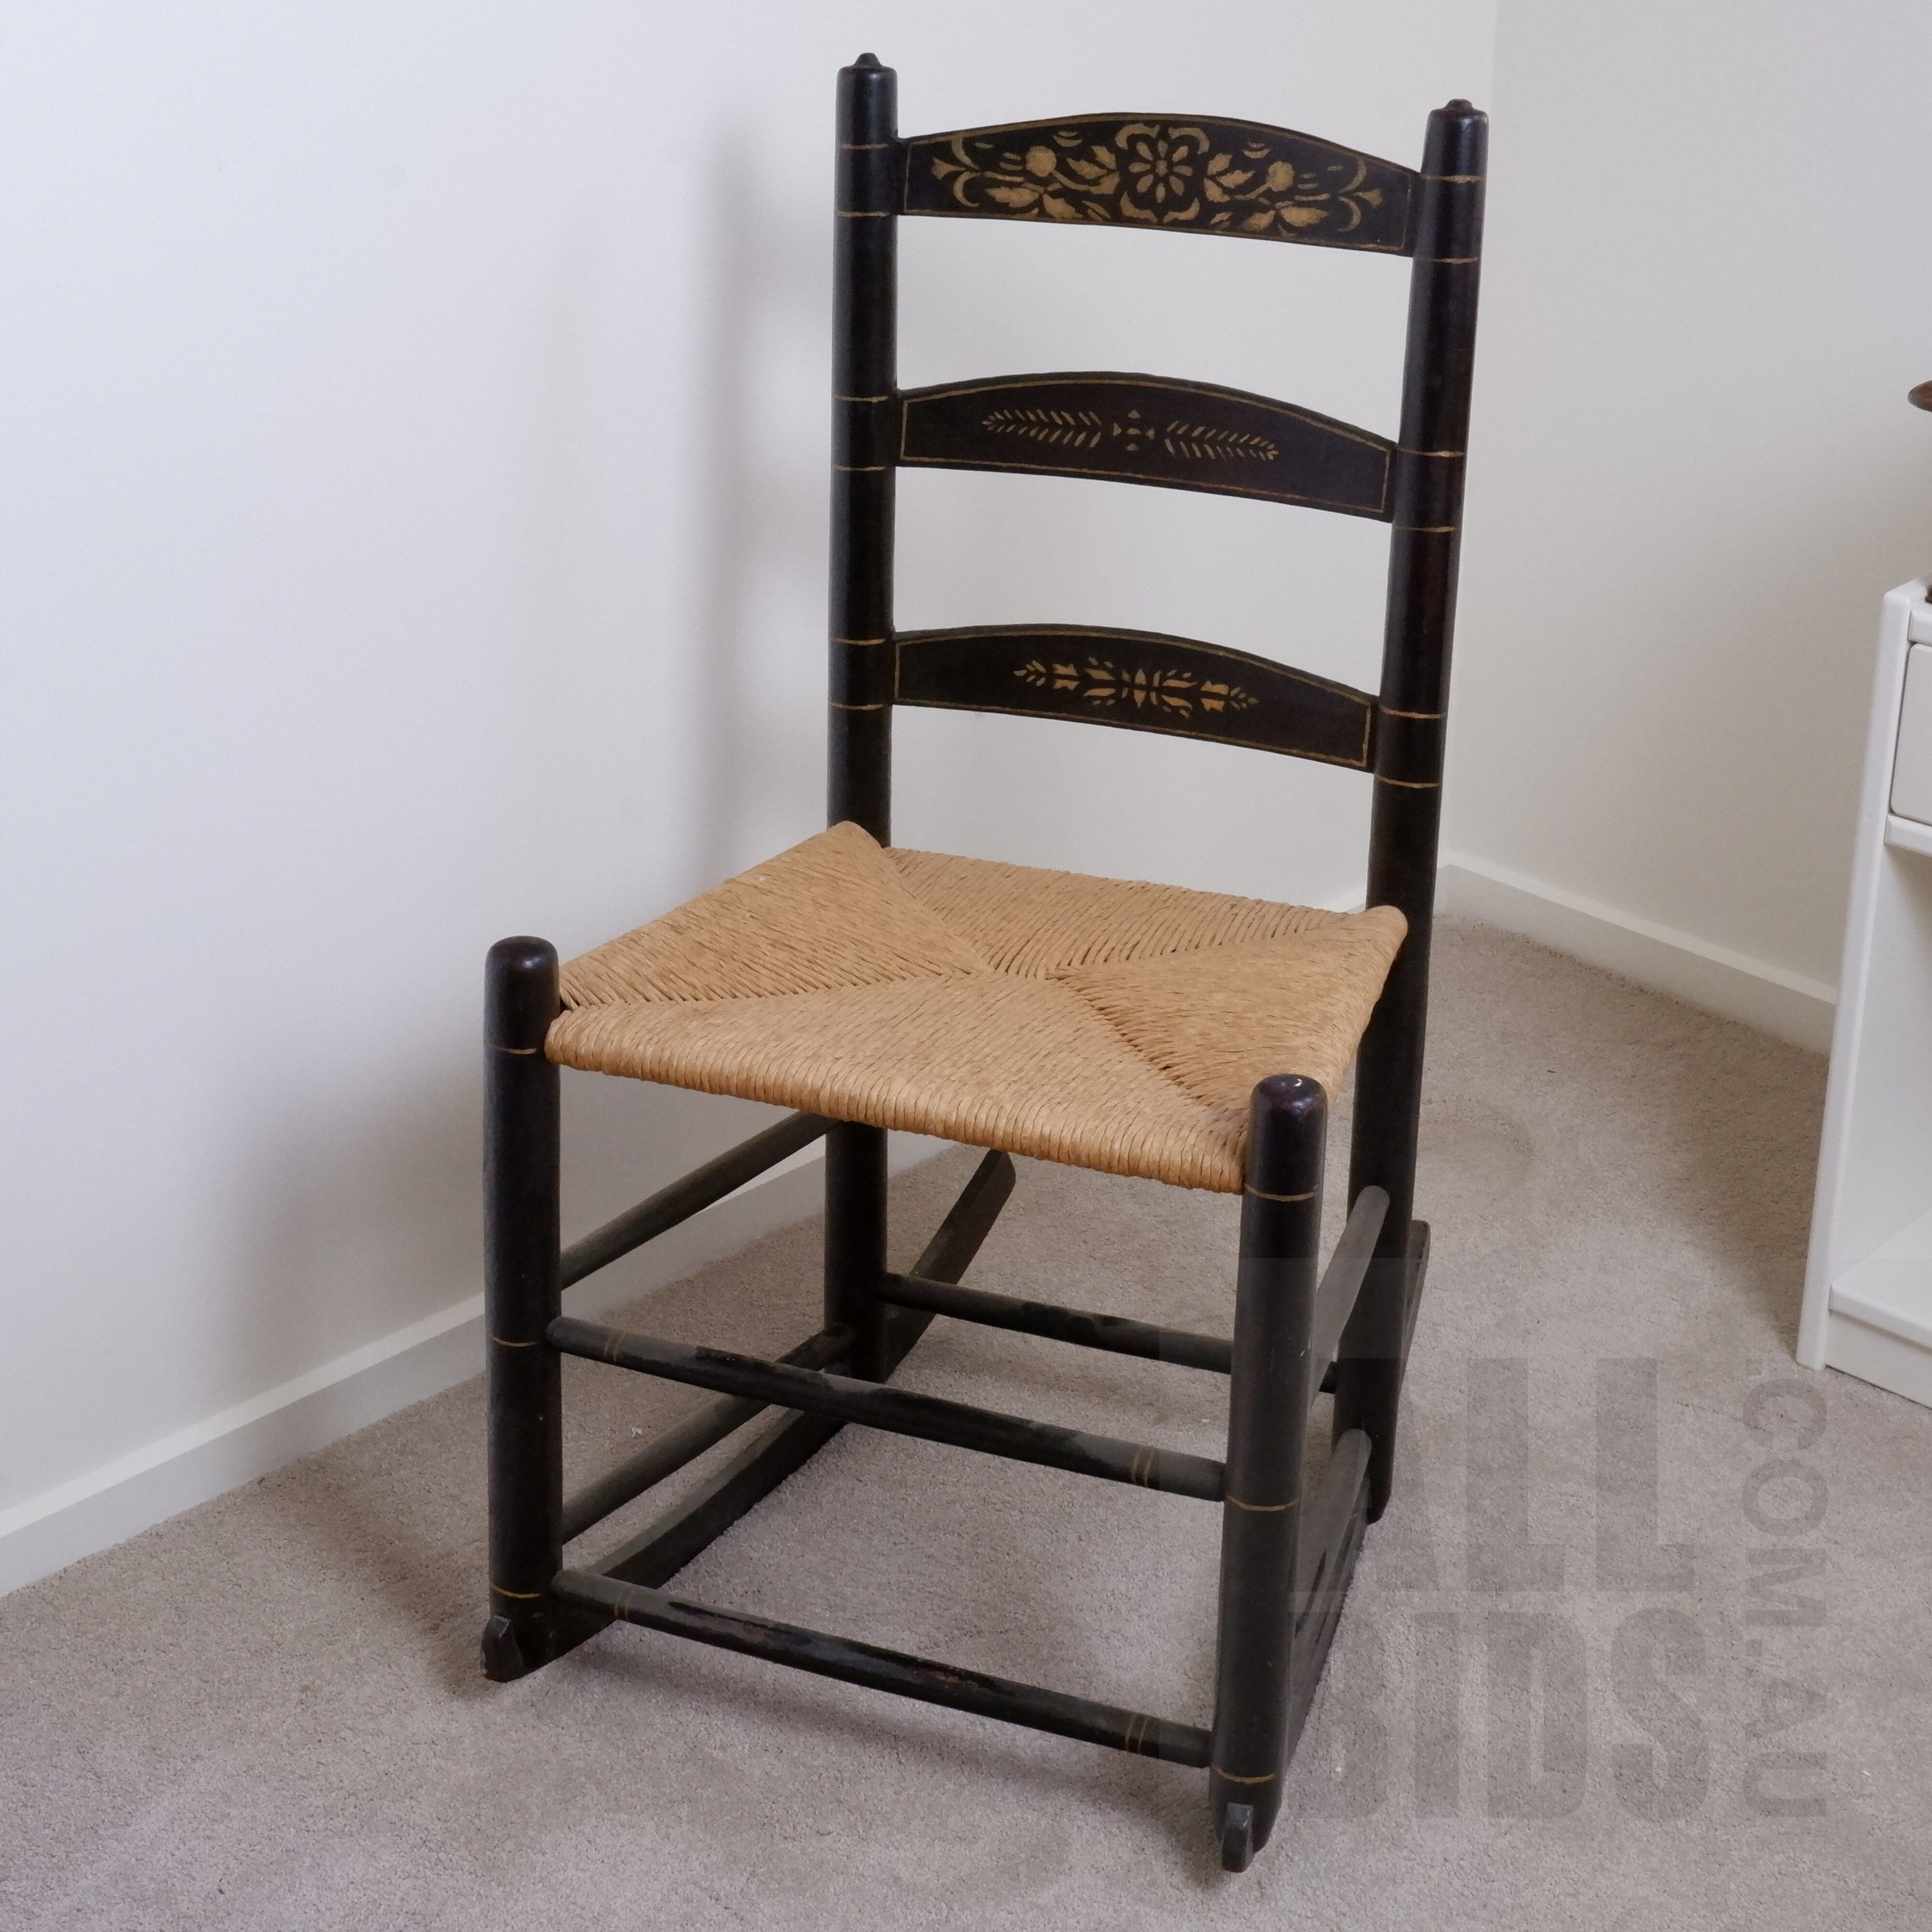 'Antique Ebonized Rocking Chair with Rattan Seat, Early 20th Century'